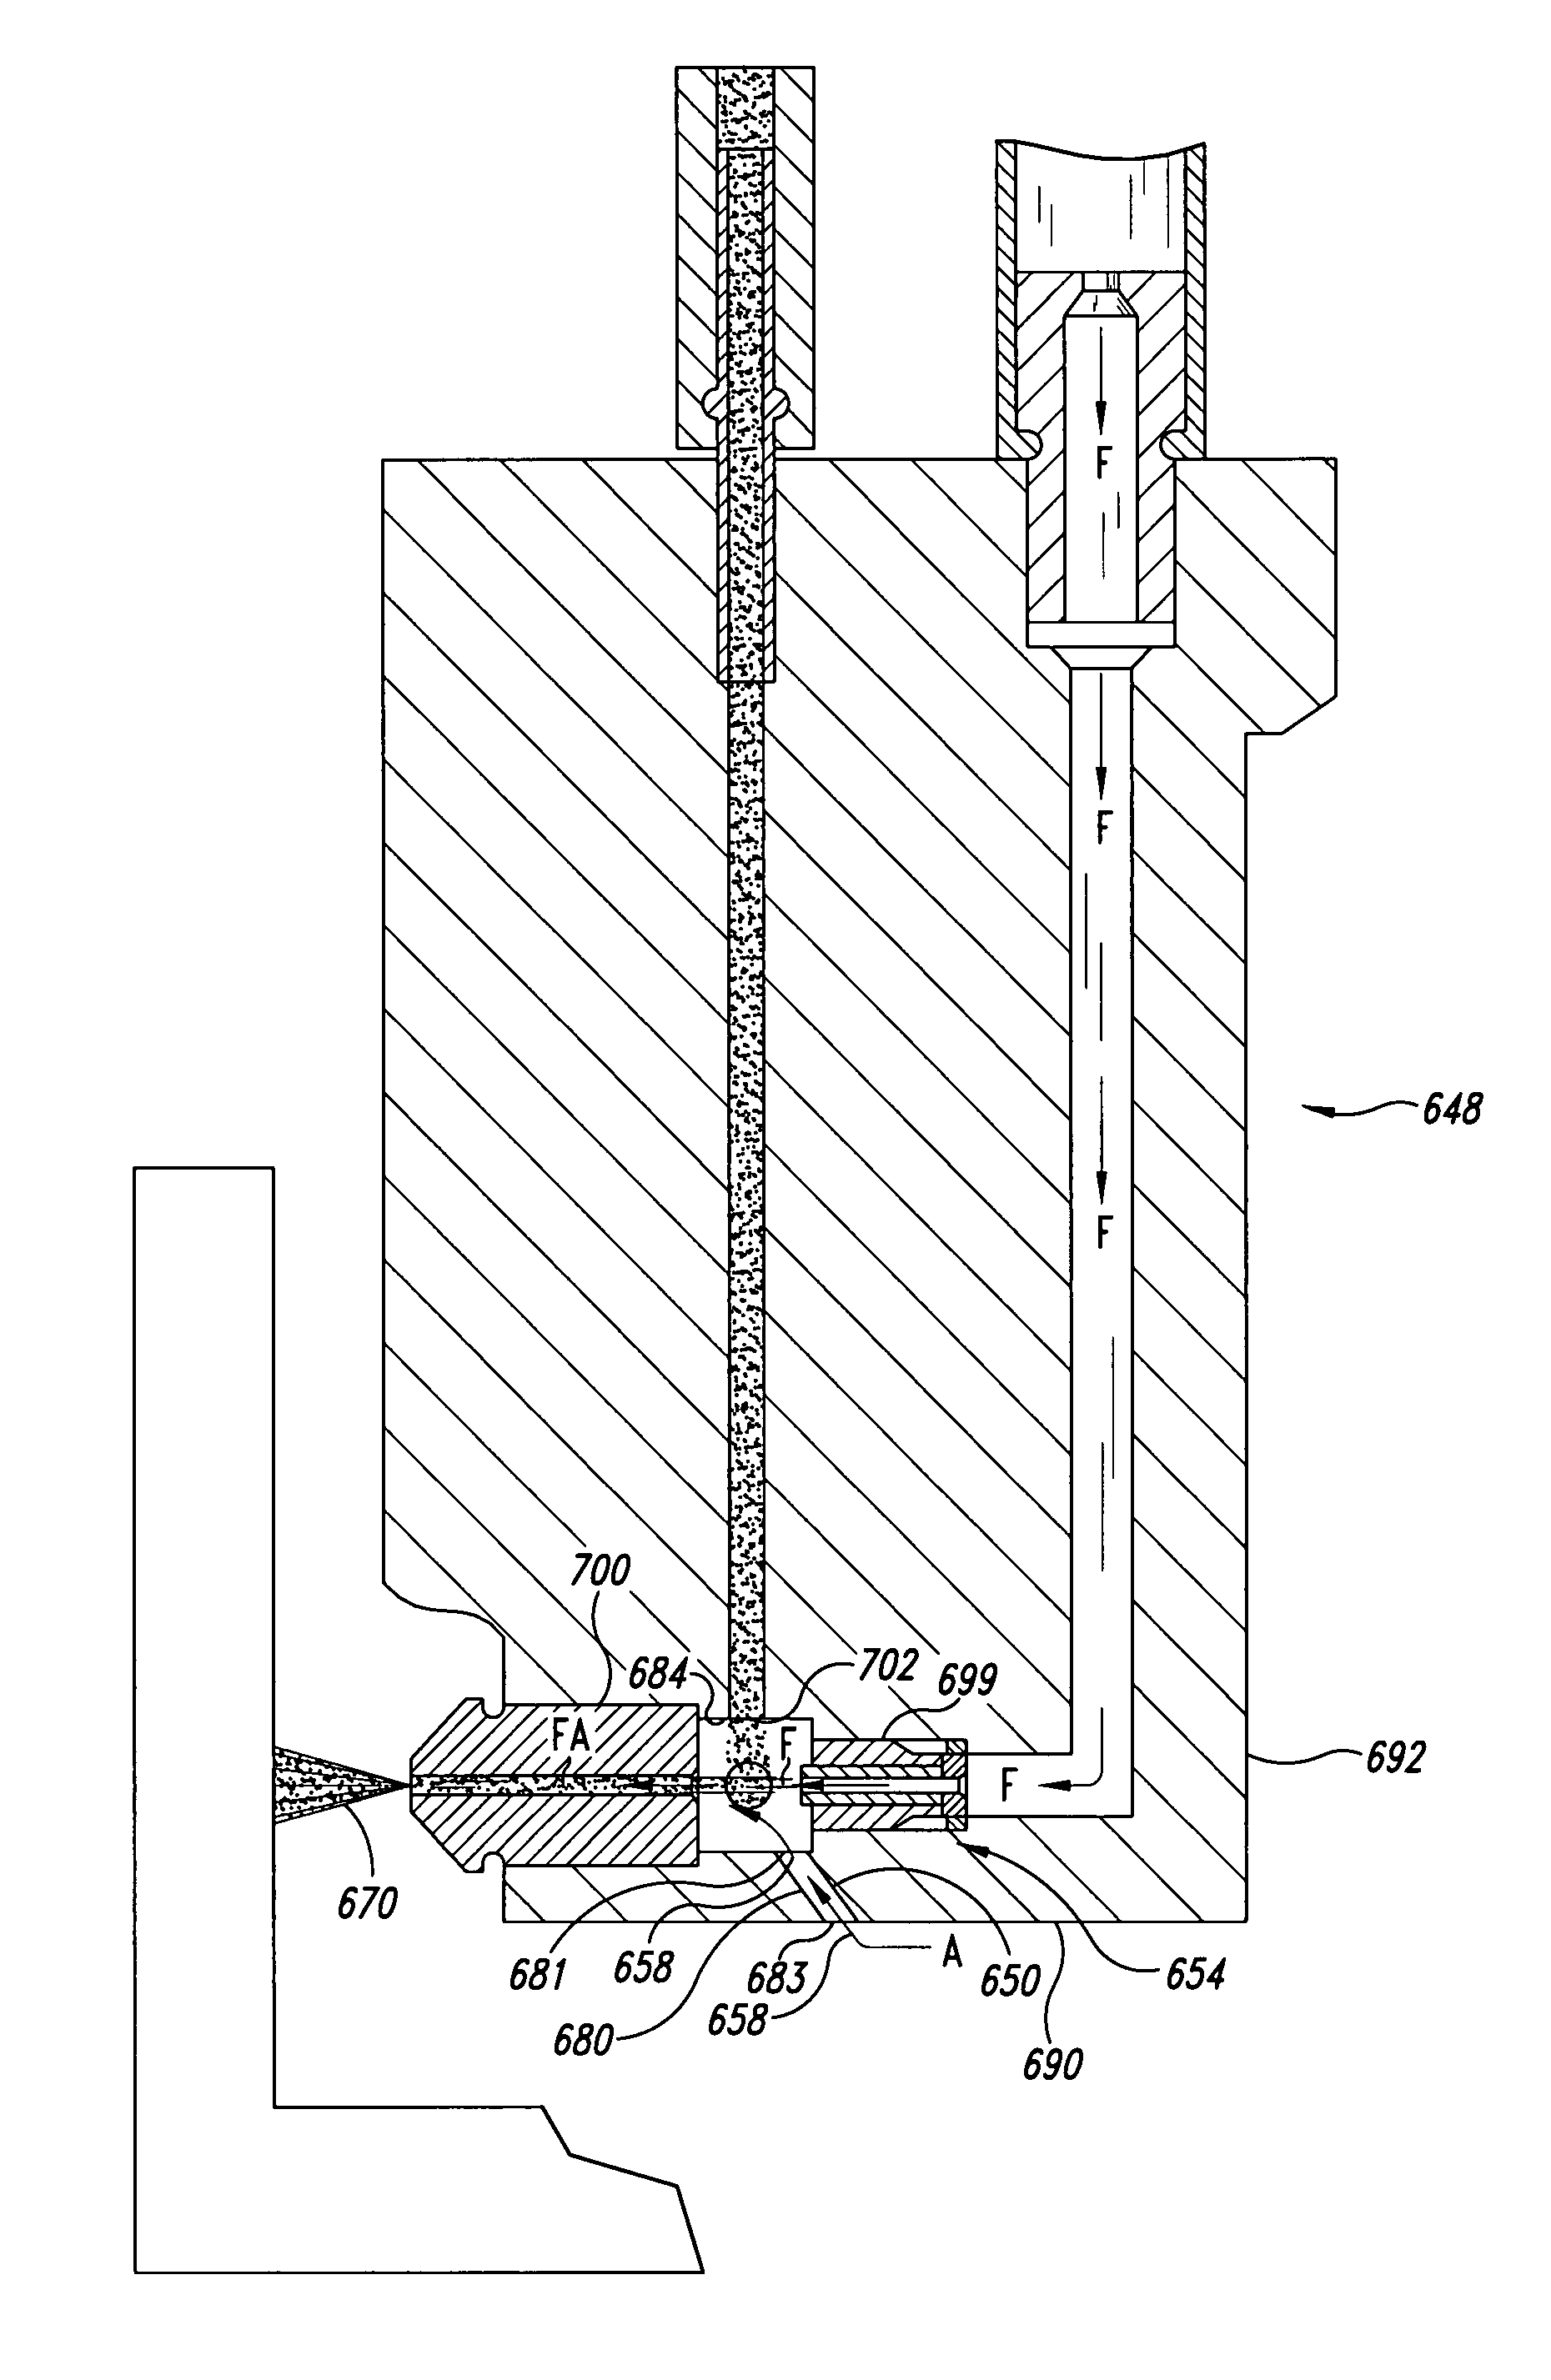 Apparatus and process for formation of laterally directed fluid jets